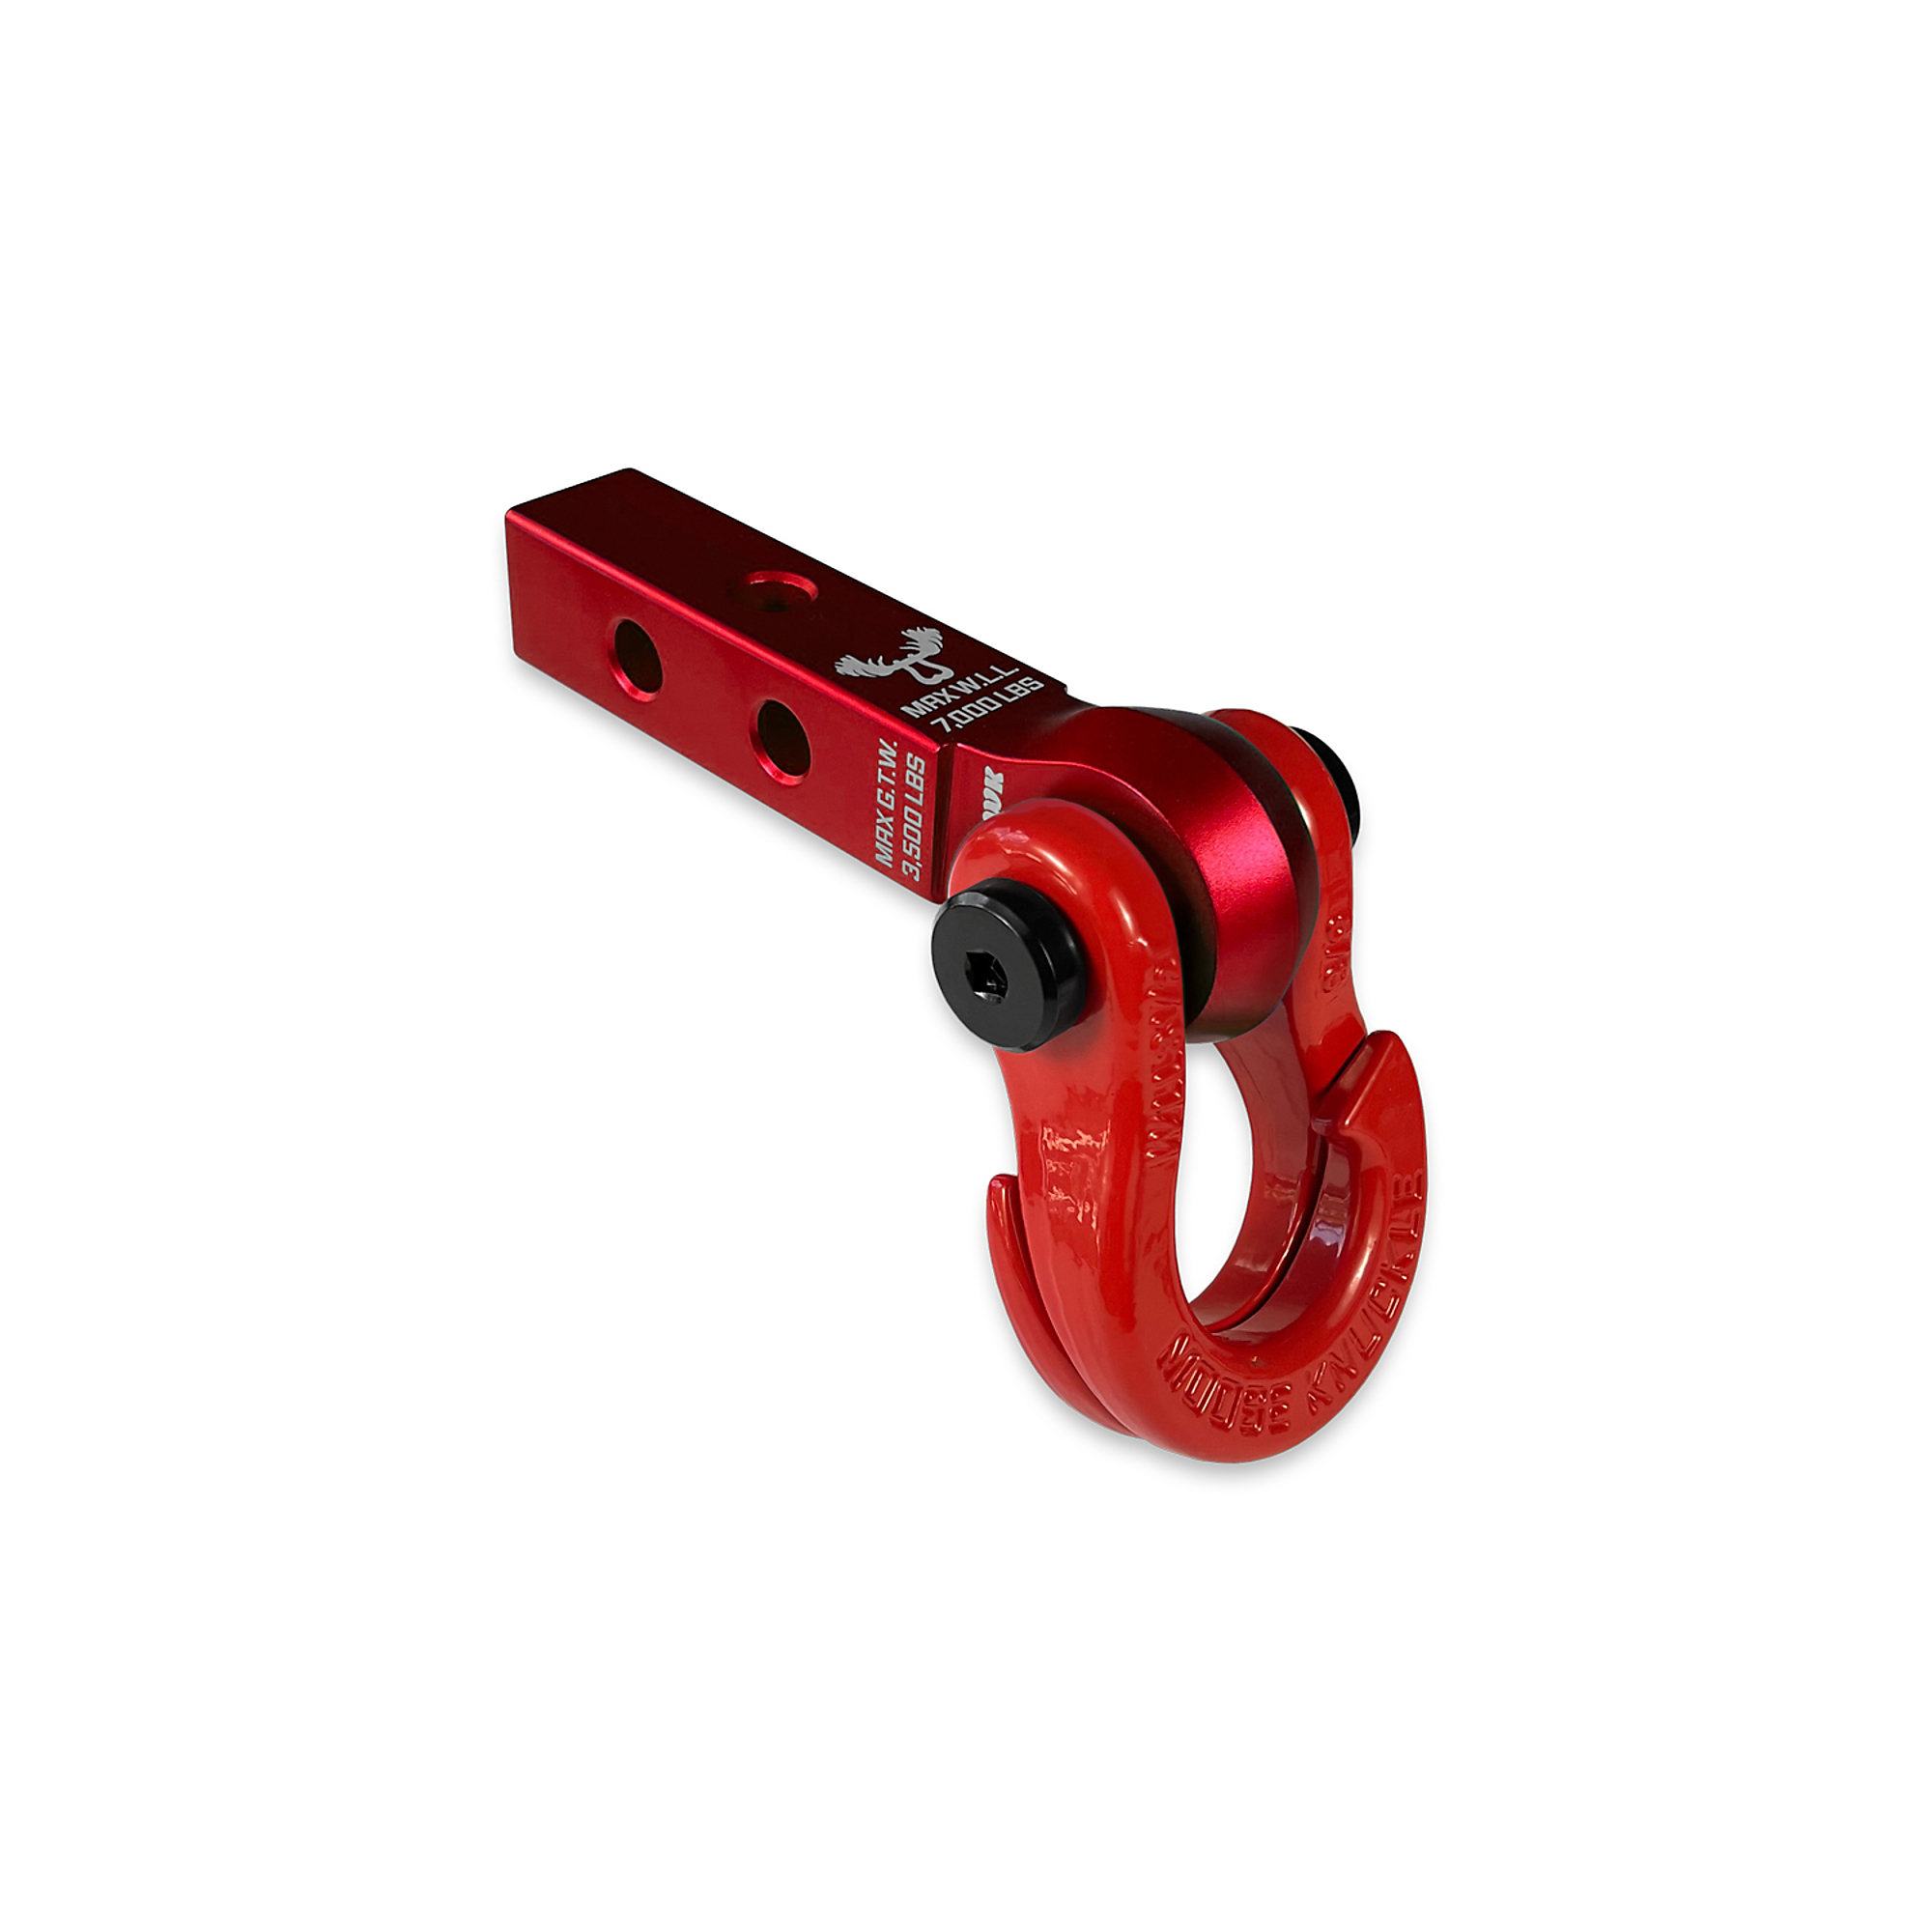 Moose Knuckle Offroad, 5/8 Jowl Split Shackle and Mohawk 1.25 Receiver Combo, Gross Towing Weight 3500 lb, Class Rating Class II, Model FN000044-006